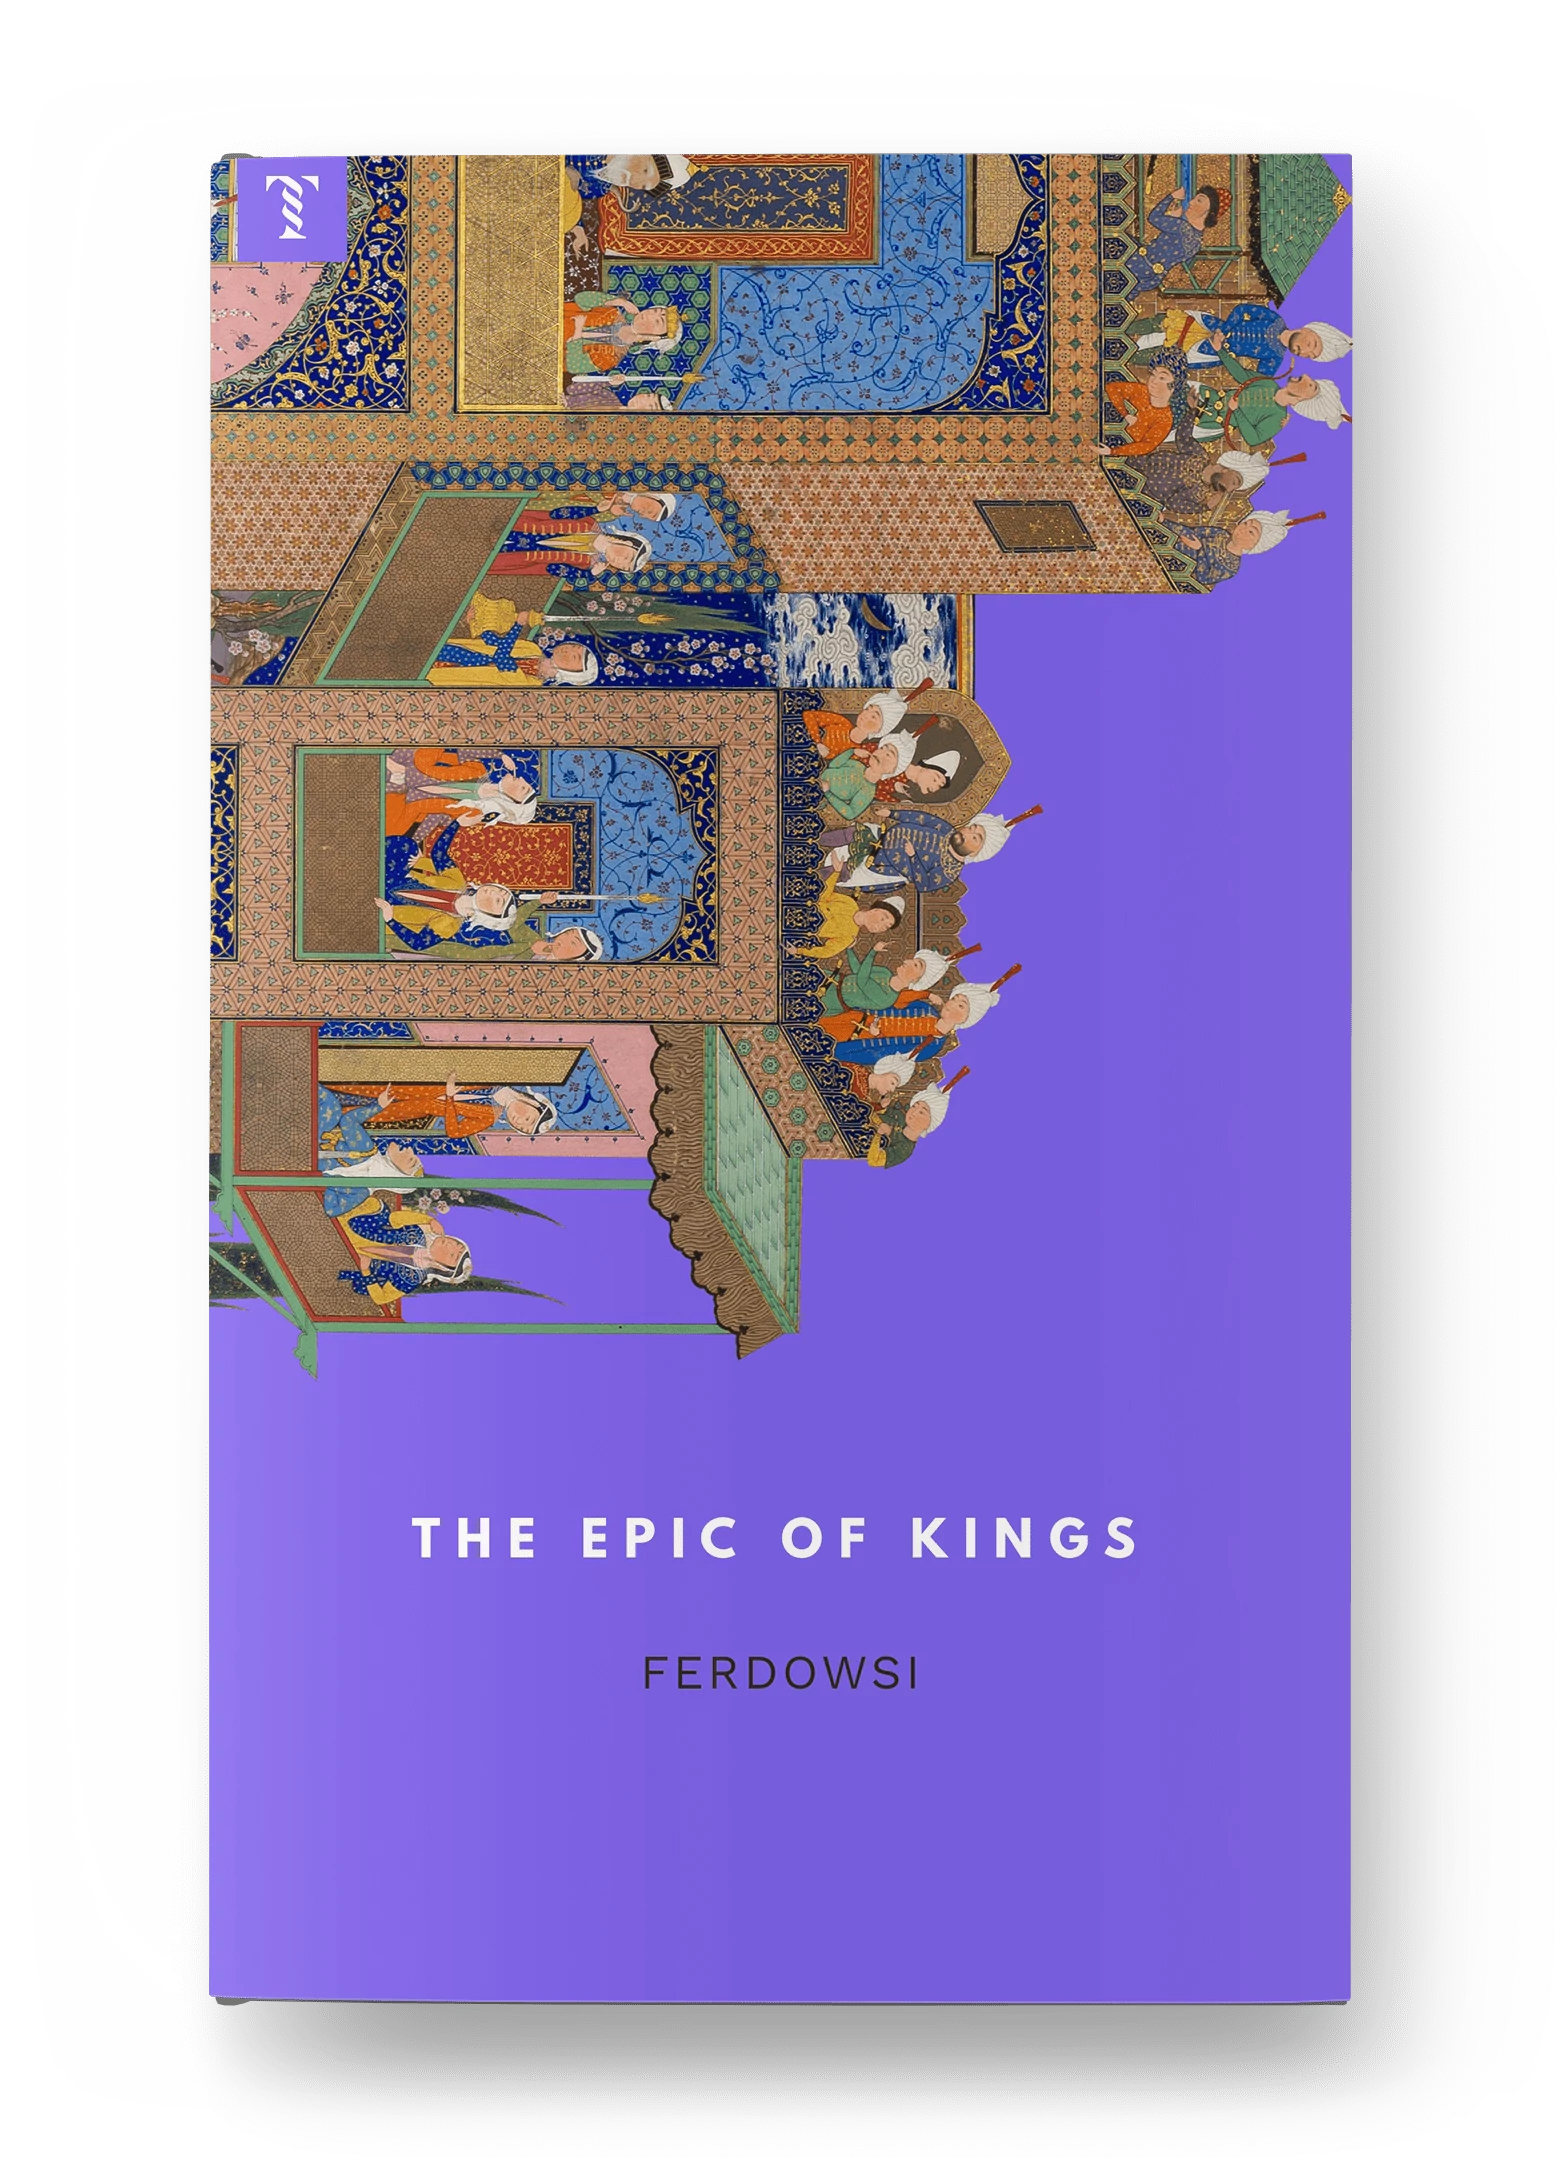 The Epic of Kings, Medieval Persian Art